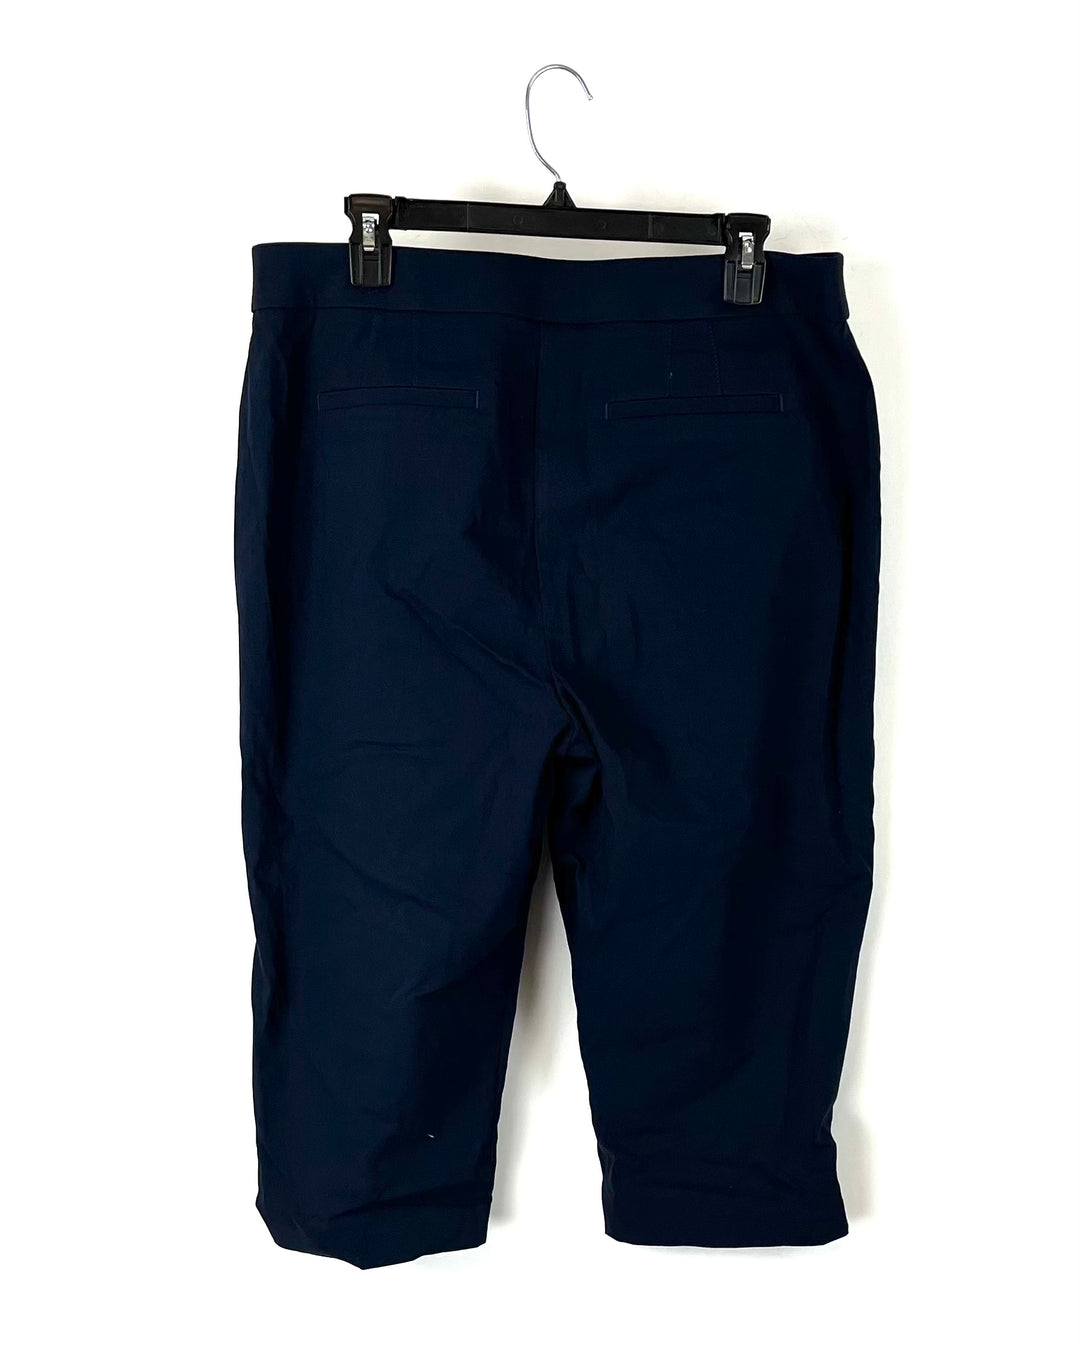 Navy Blue Cropped Trousers - Size 16